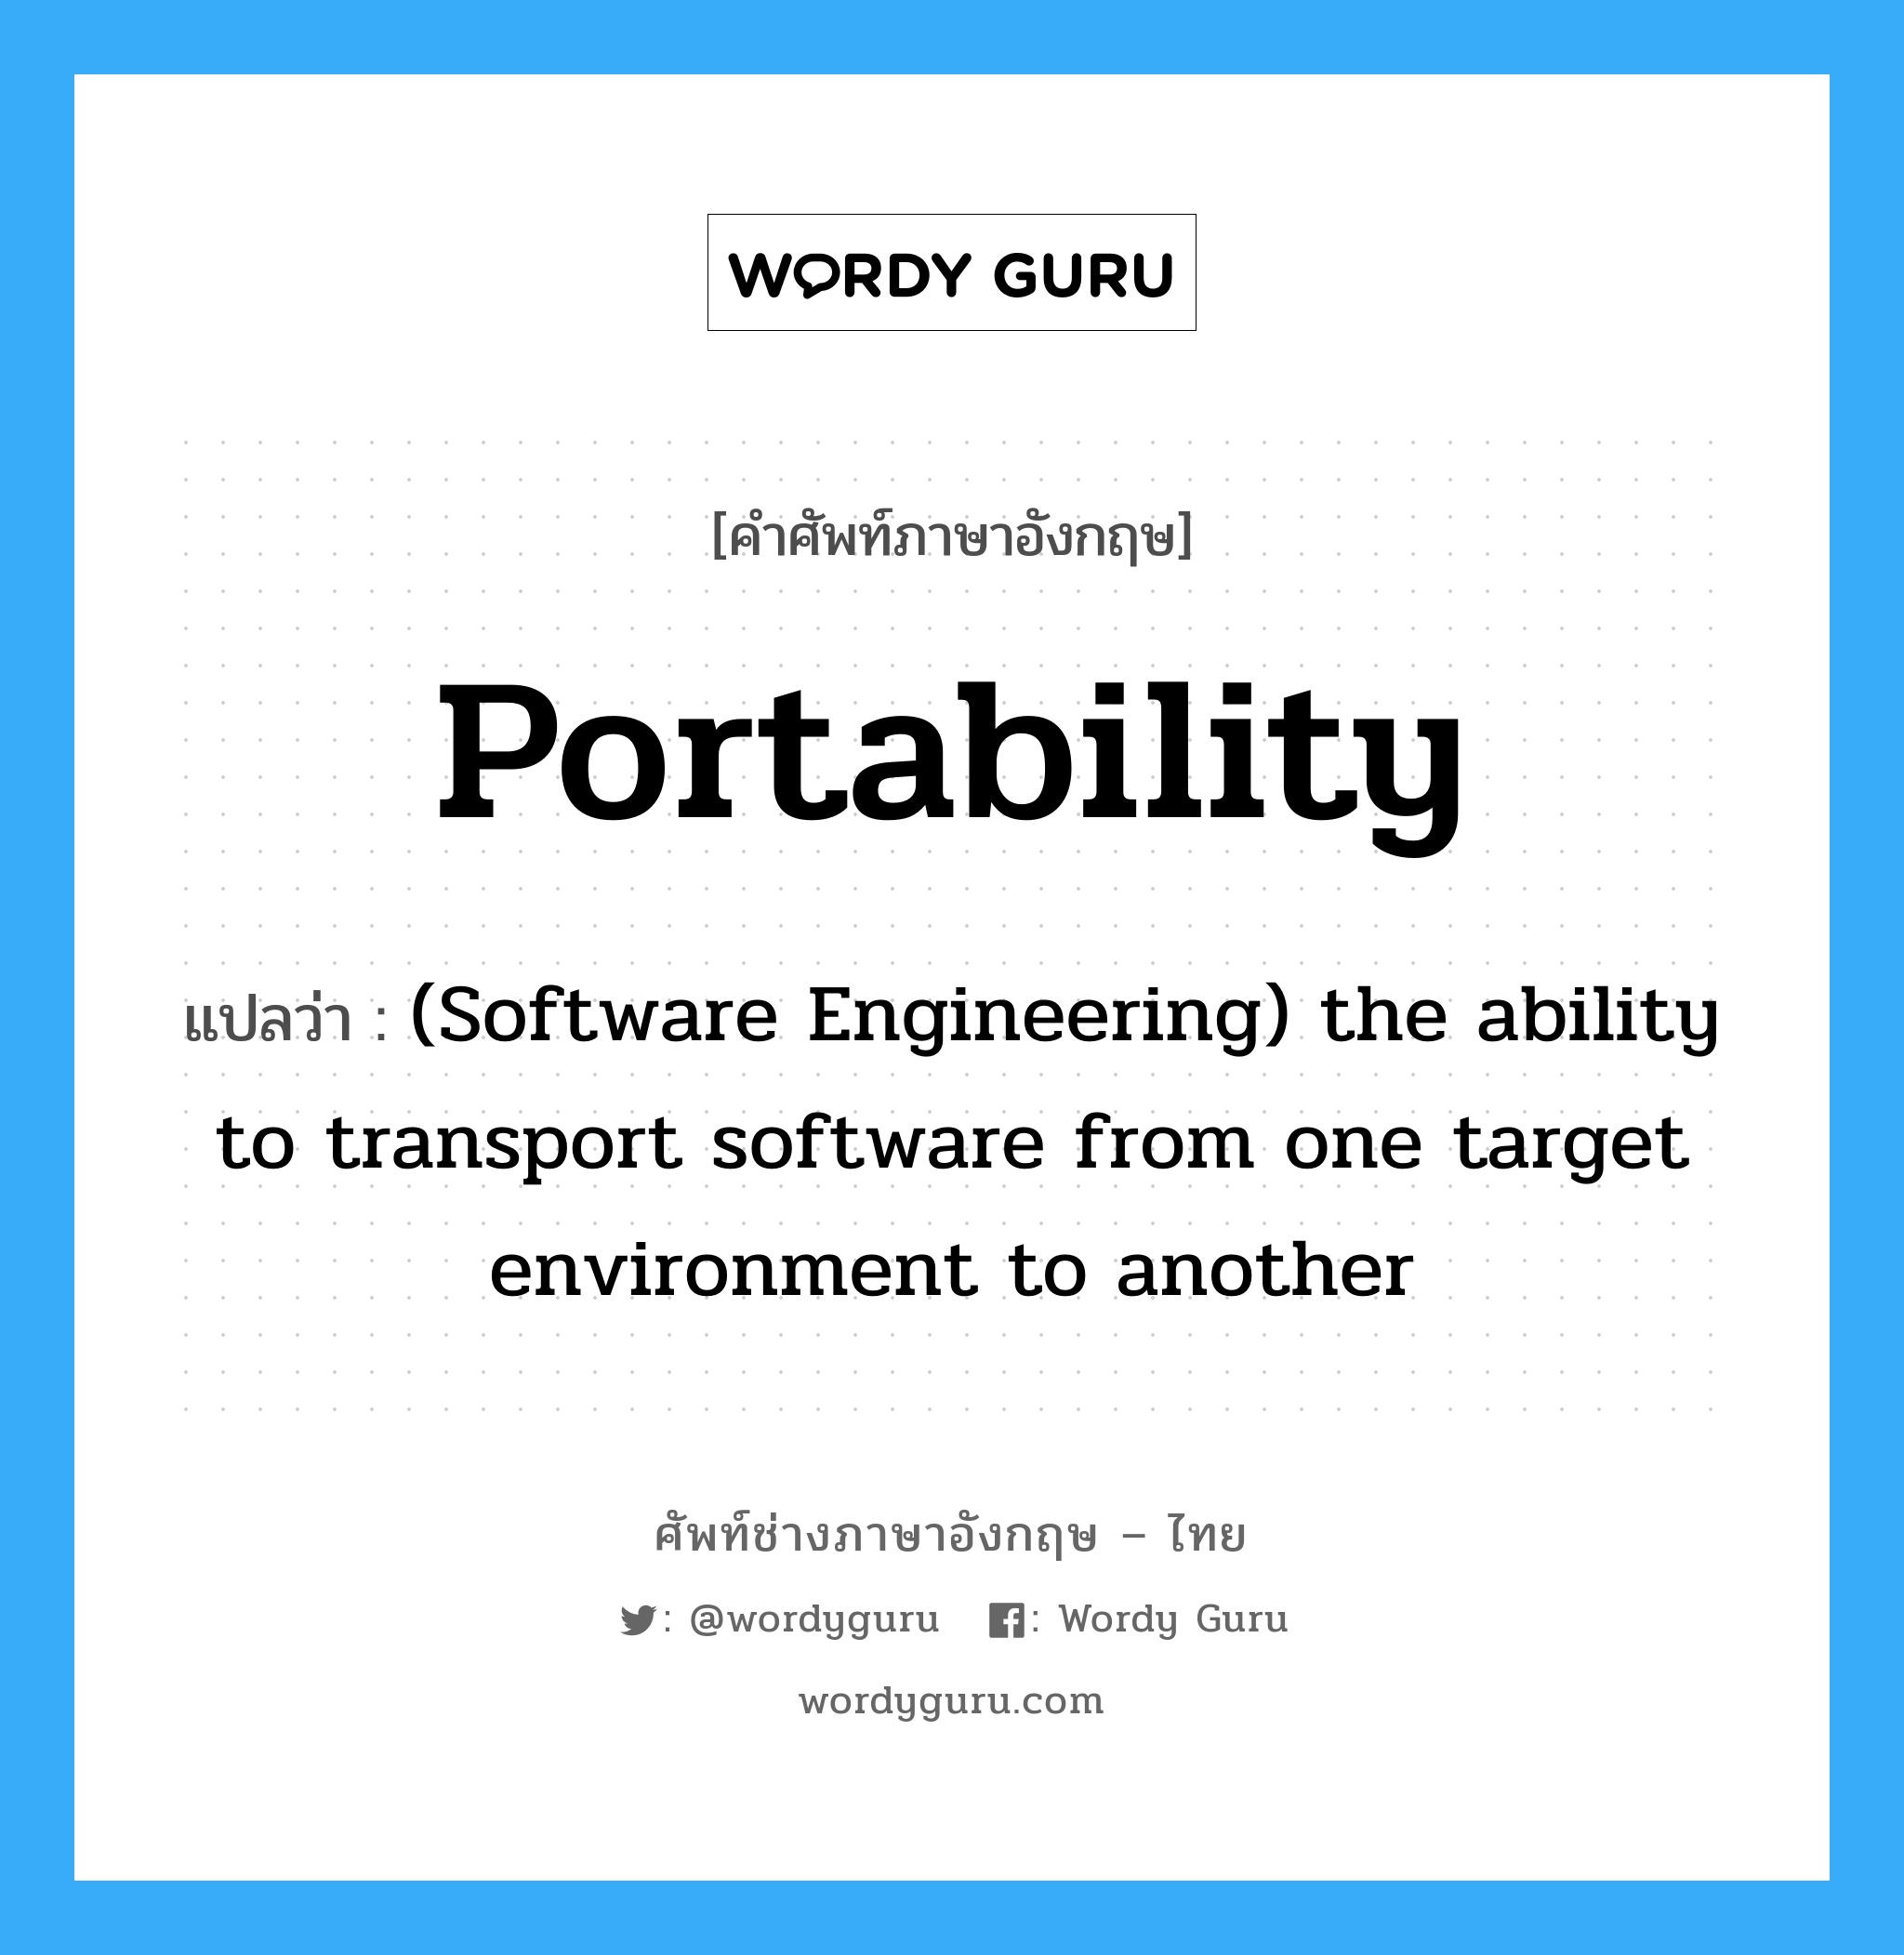 Portability แปลว่า?, คำศัพท์ช่างภาษาอังกฤษ - ไทย Portability คำศัพท์ภาษาอังกฤษ Portability แปลว่า (Software Engineering) the ability to transport software from one target environment to another